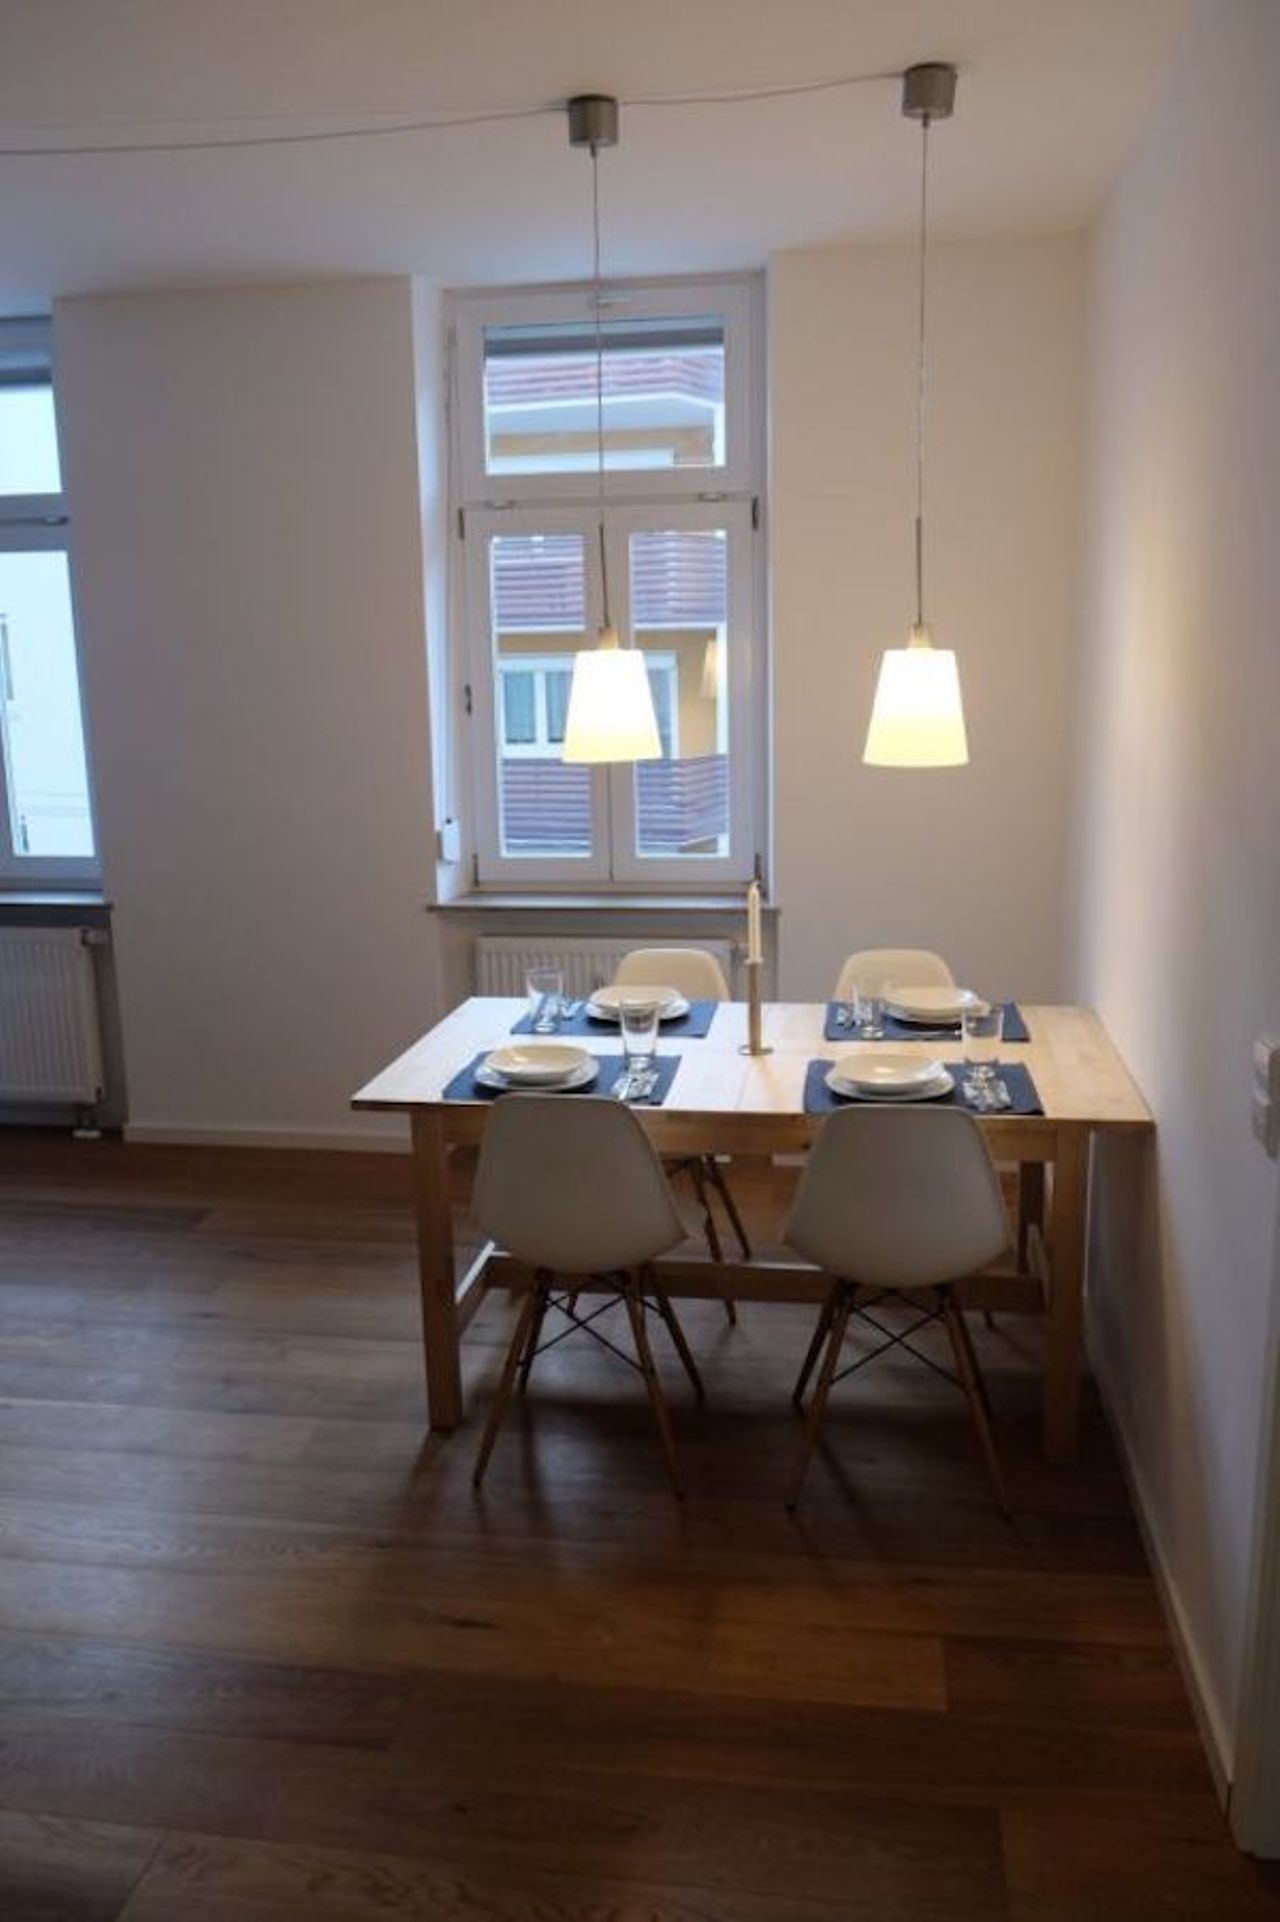 Neat flat in Stuttgart, well sited for pulic transport to main station and airport